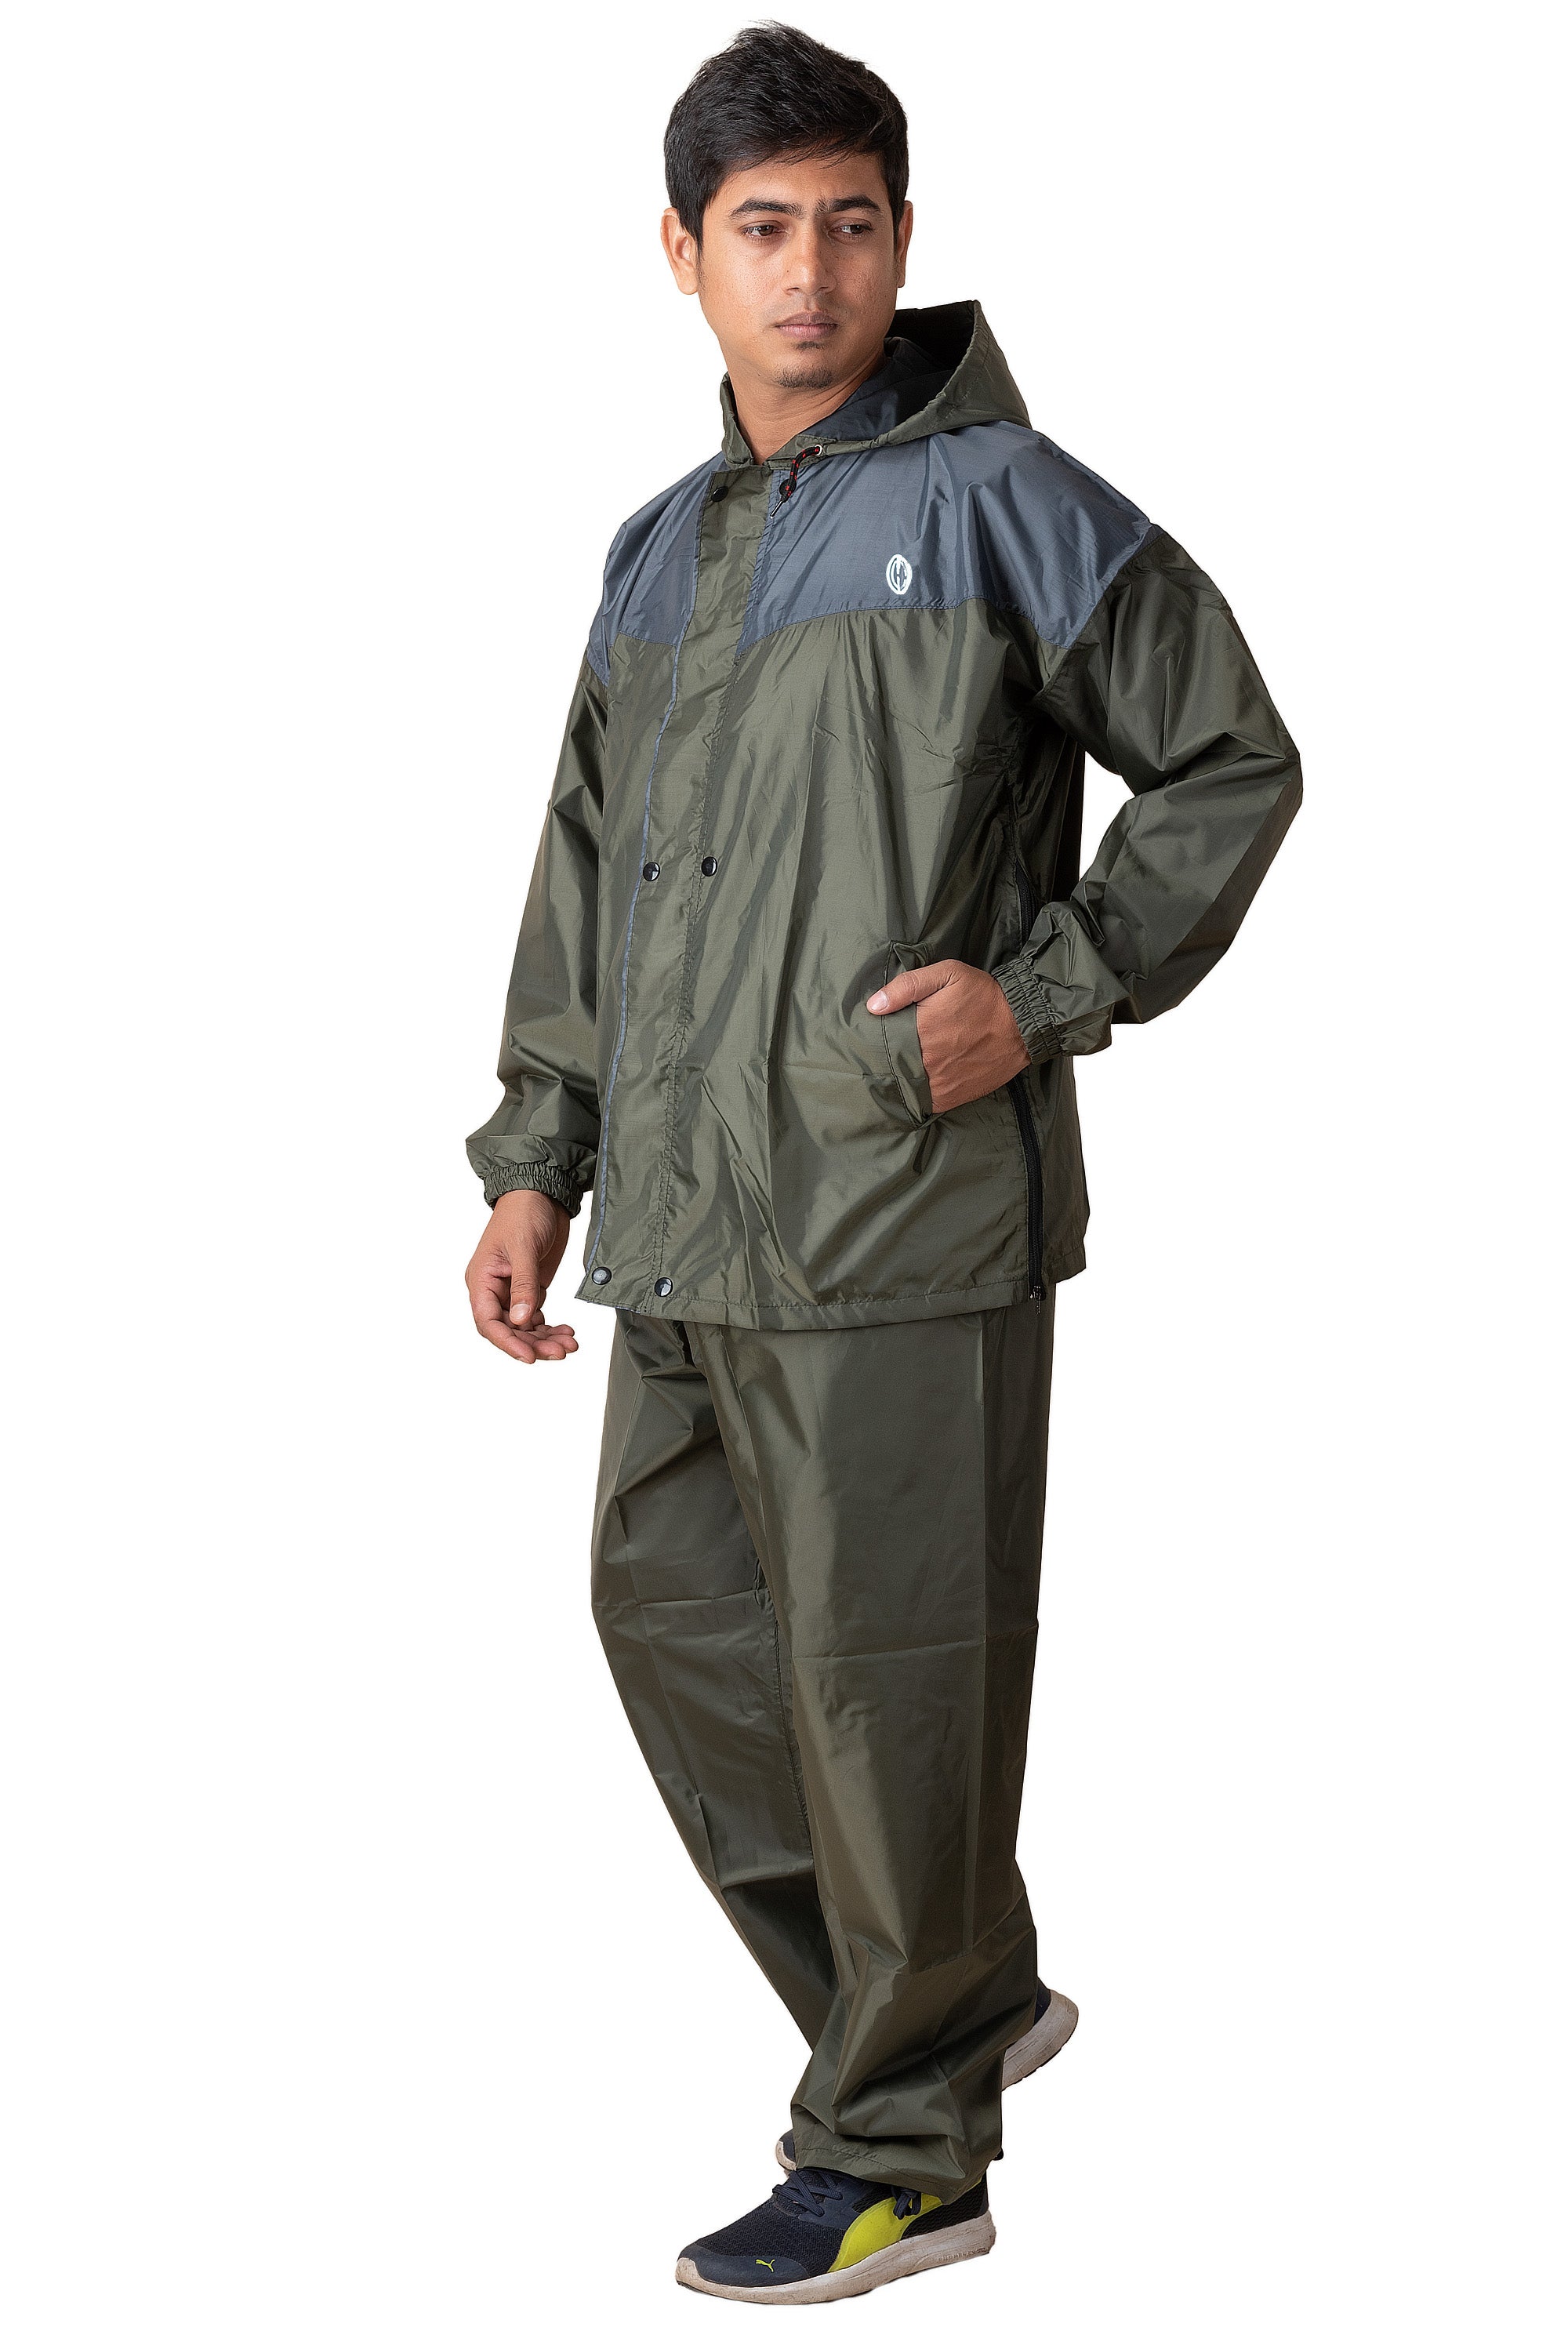 The Dry Cape's Water Ranger: Premium Dual-Tone Raincoat for Men | Bike Riding Waterproof Gear with Reflective Safety & Adjustable Features